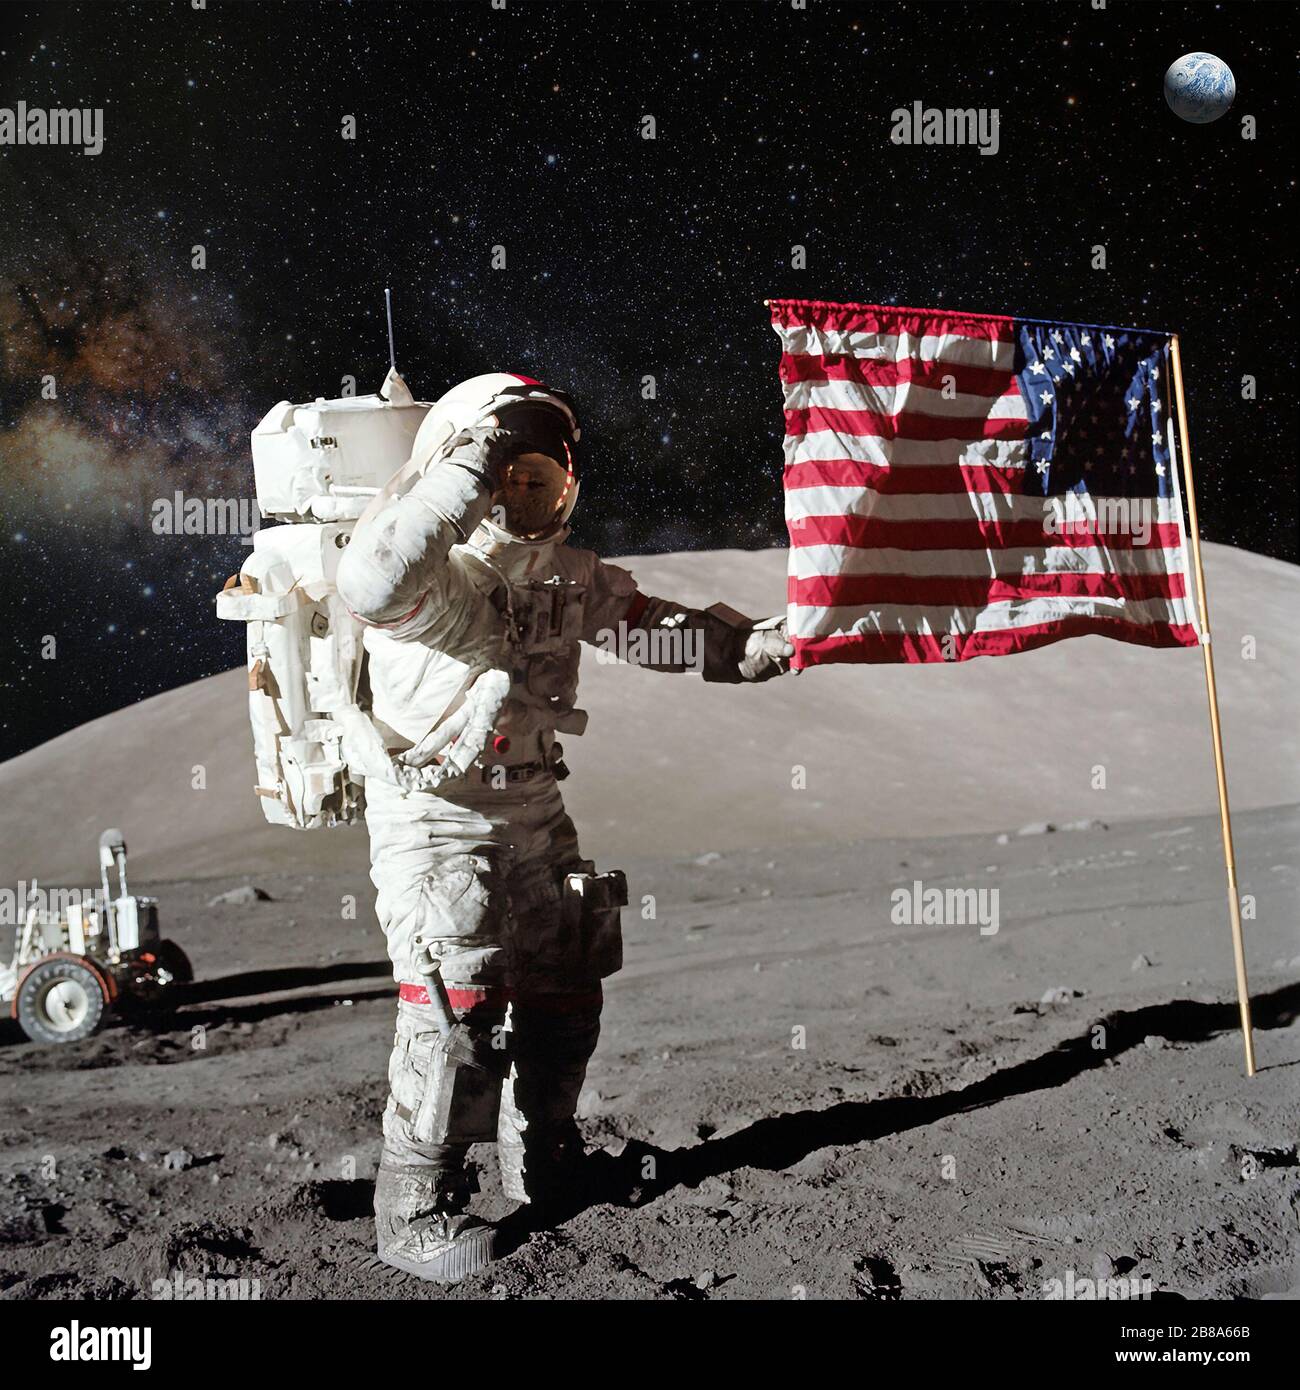 Astronaut on lunar (moon) landing mission. Elements of this image furnished by NASA. Stock Photo